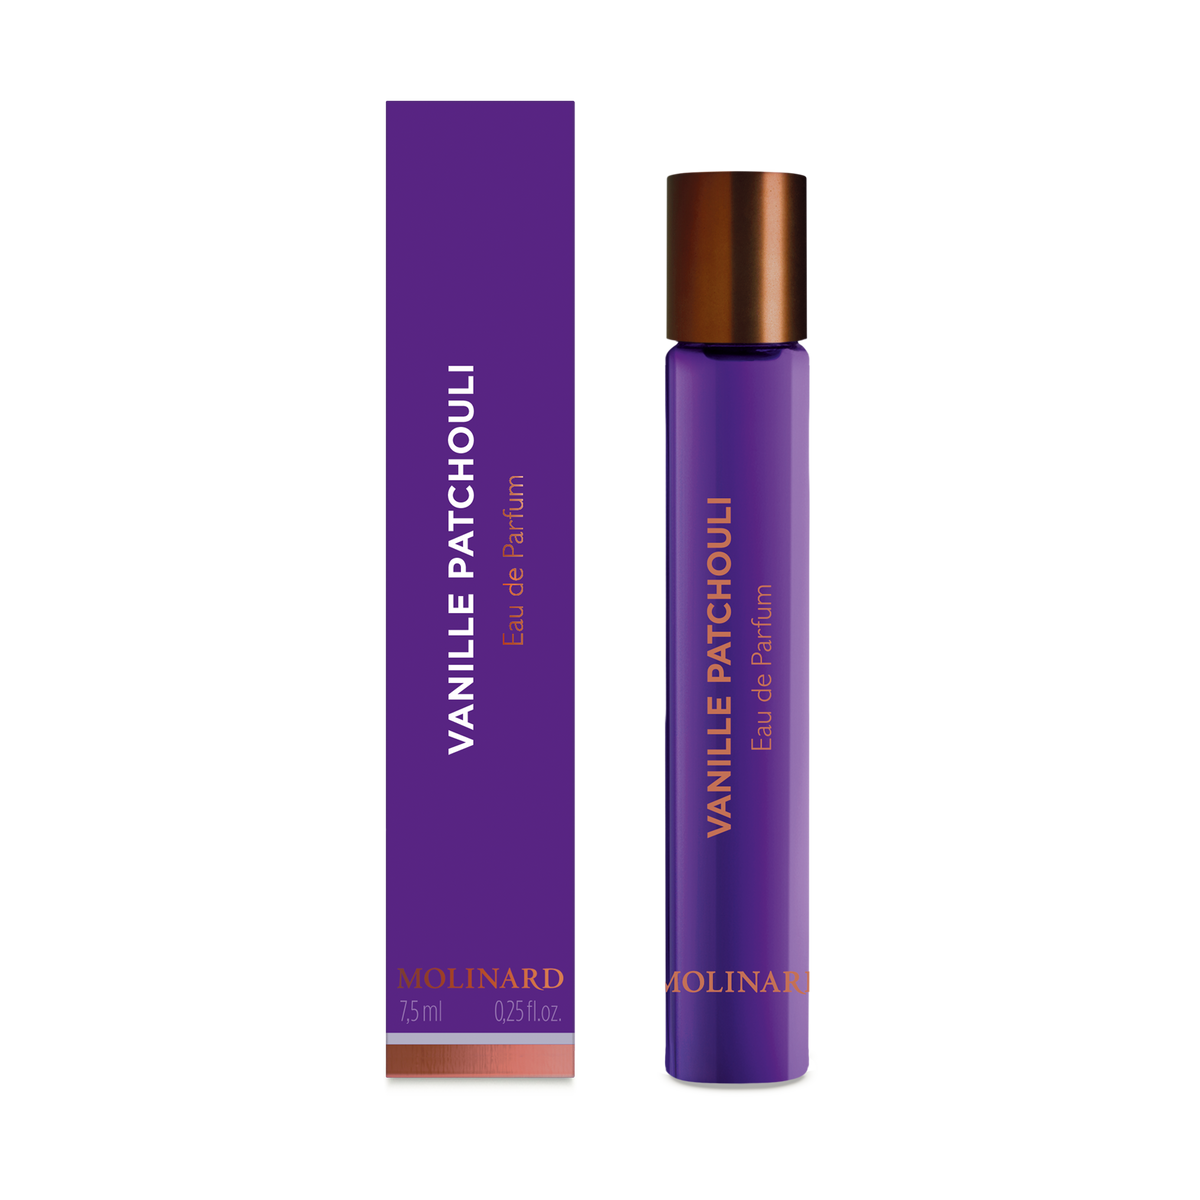 Roll-on Vanille Patchouli